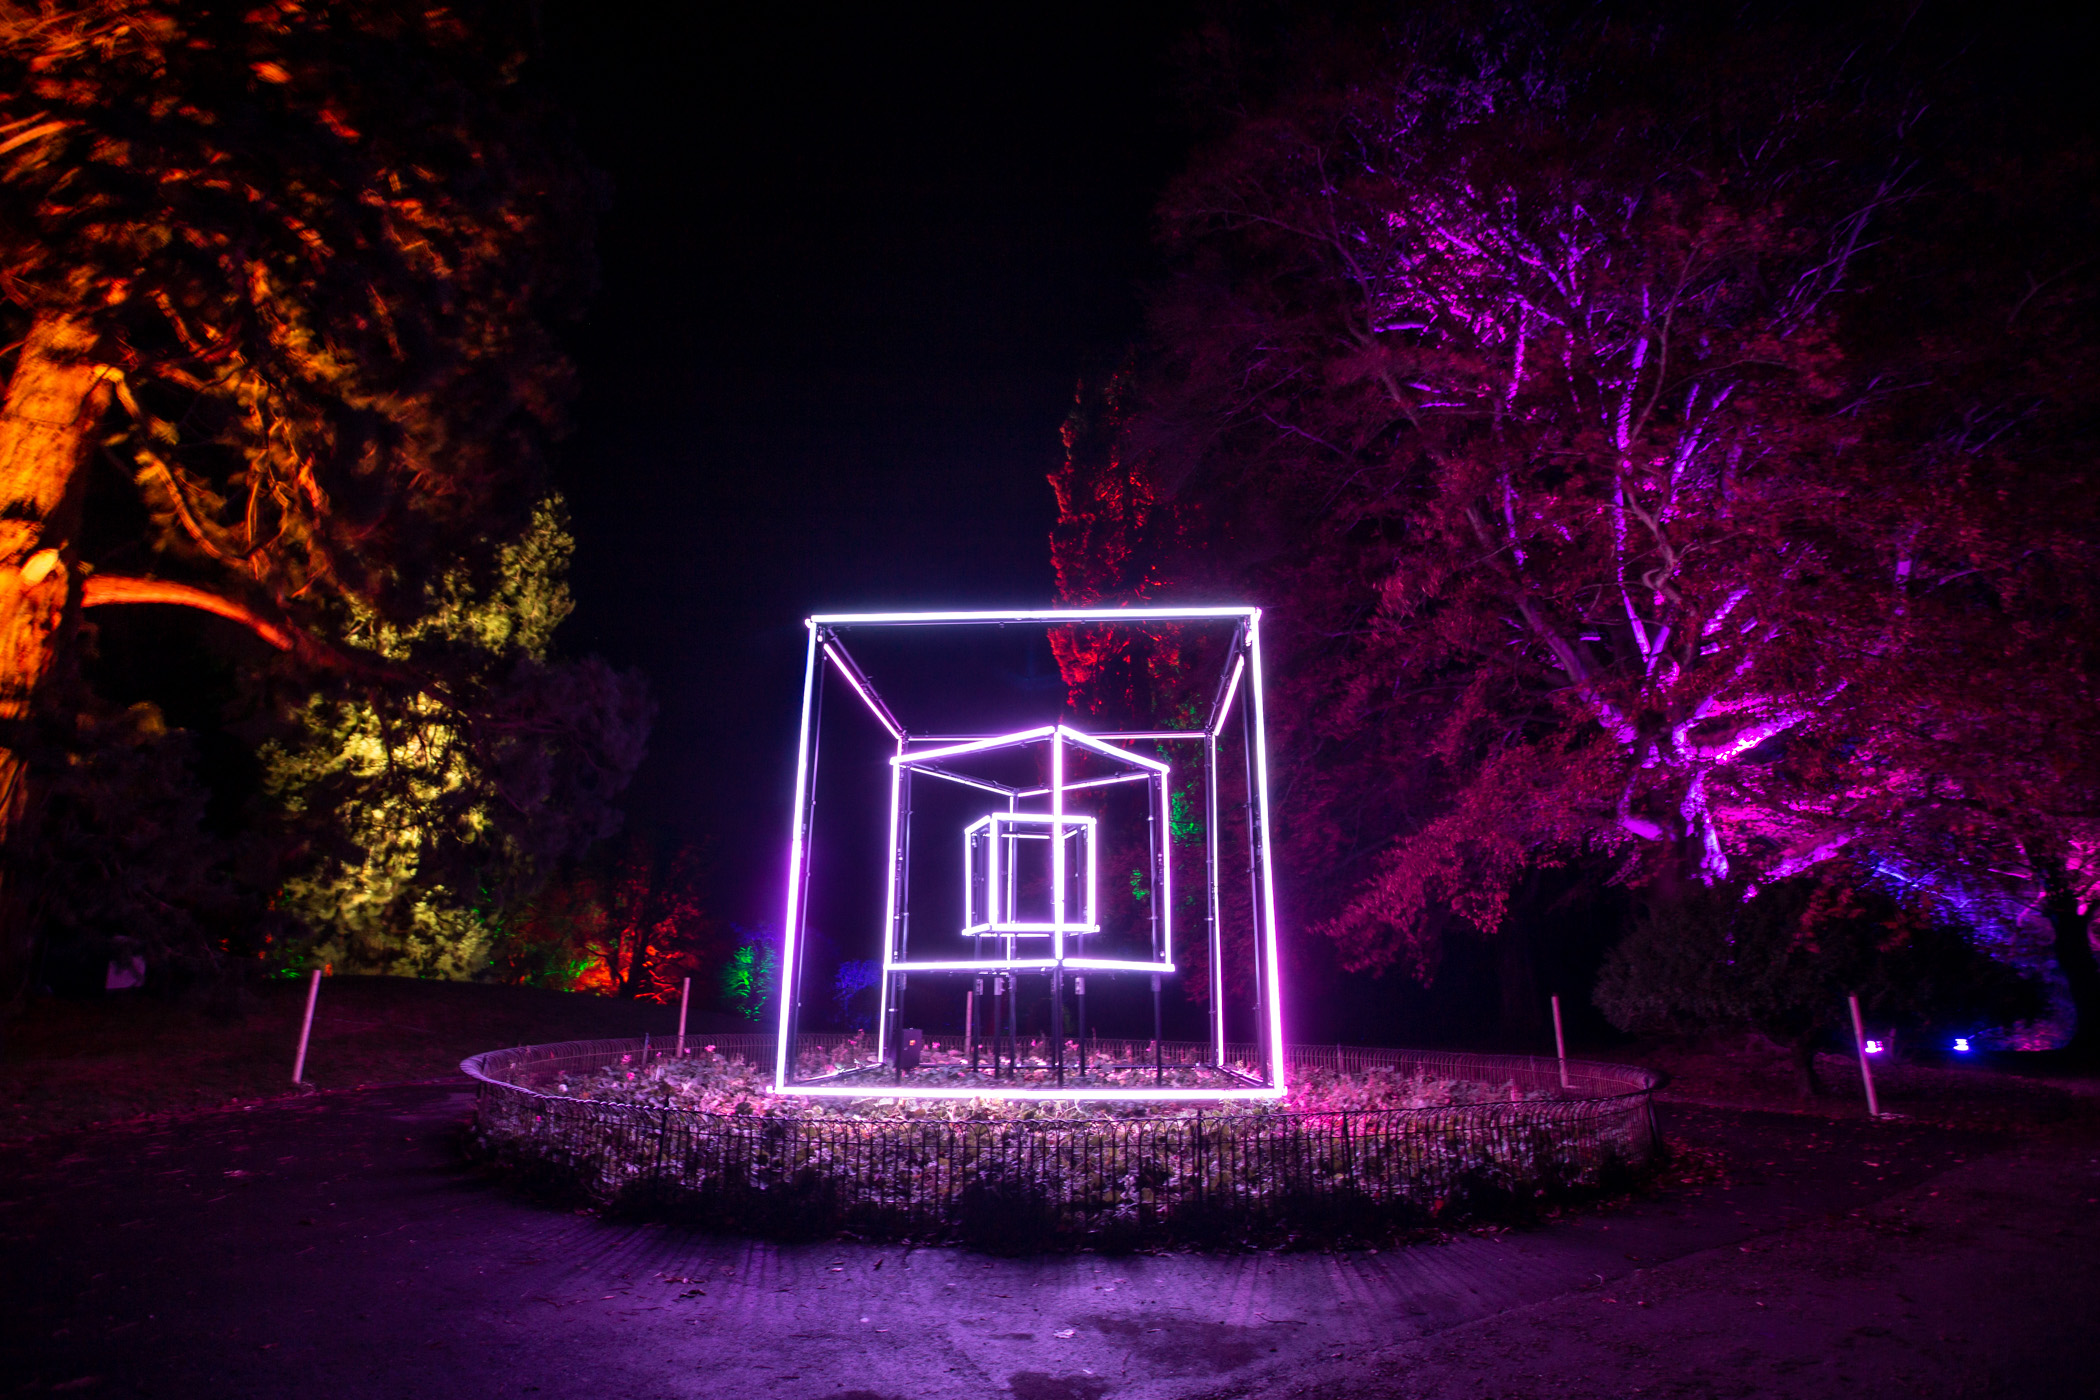 Spectacle of light set to illuminate Town Gardens this Christmas